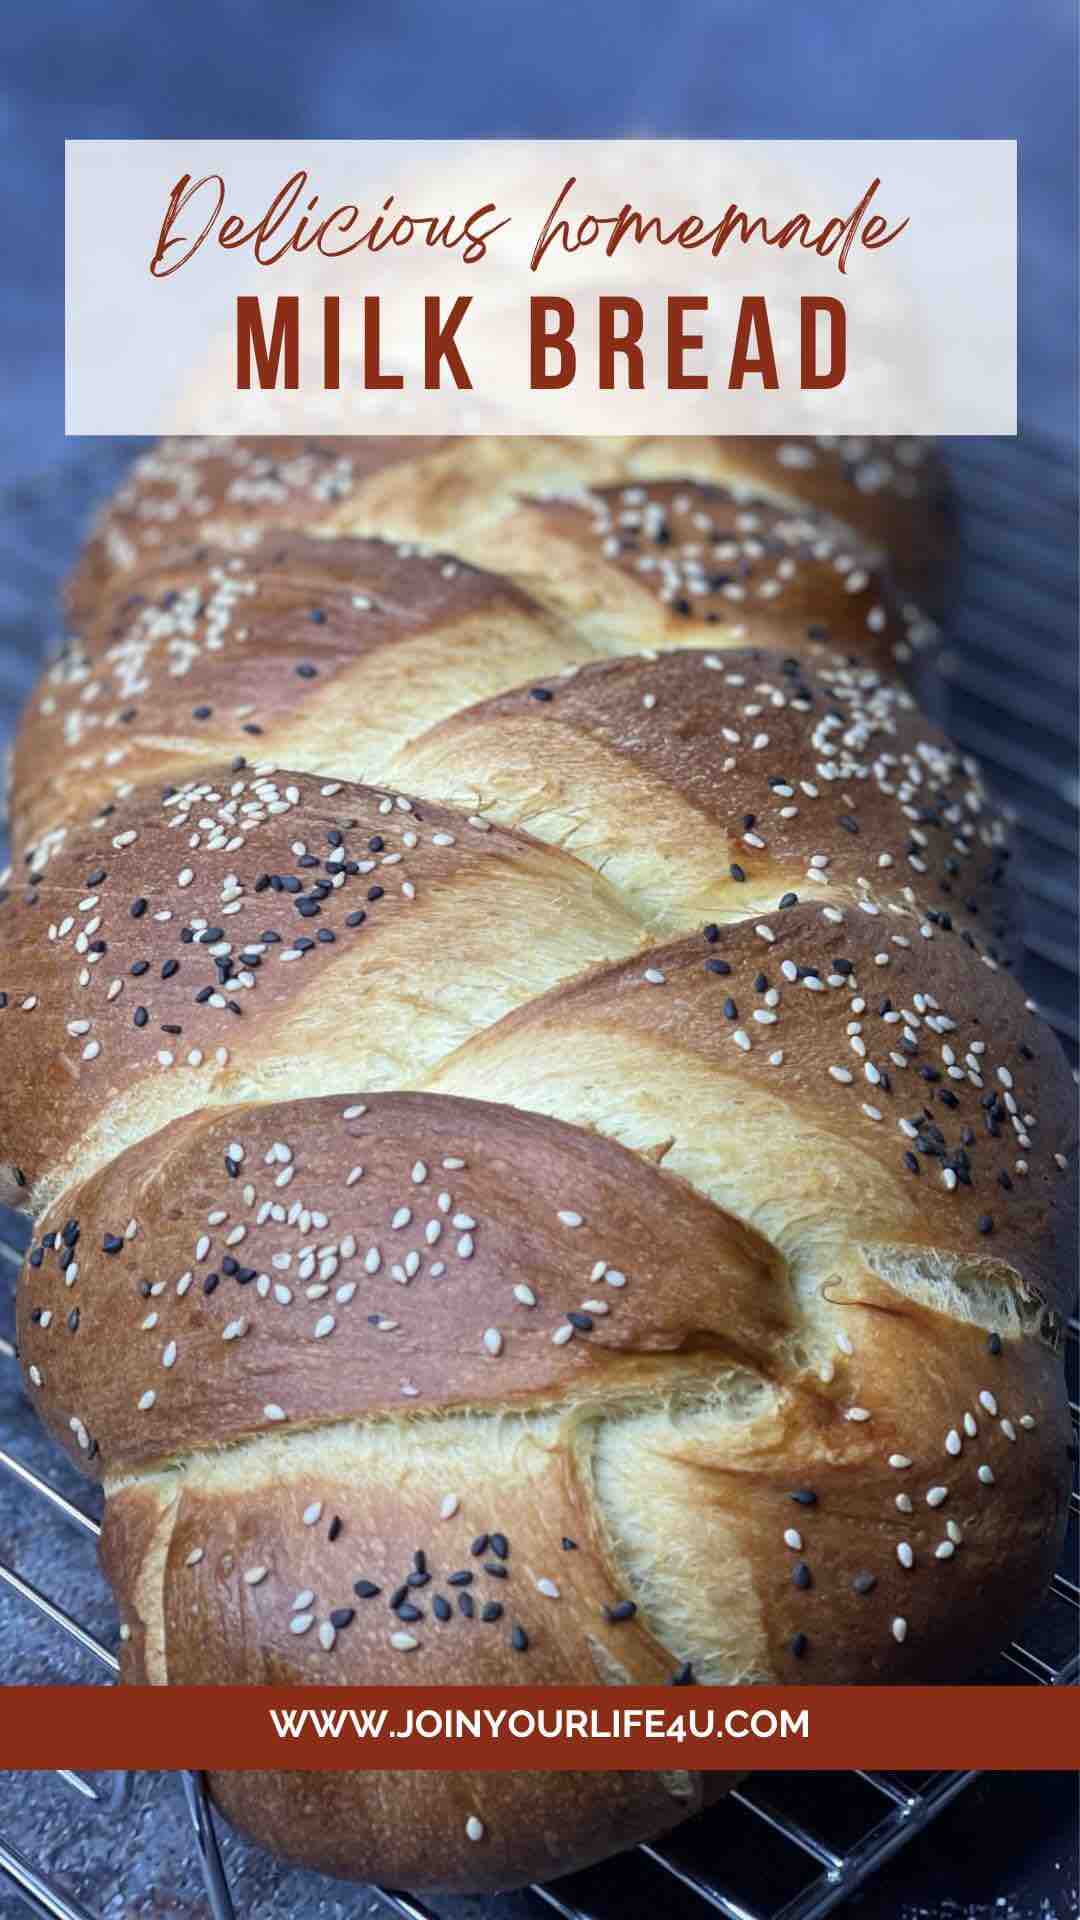 Golden brown 3 Strand Challah Bread topped with black and golden sesame seeds